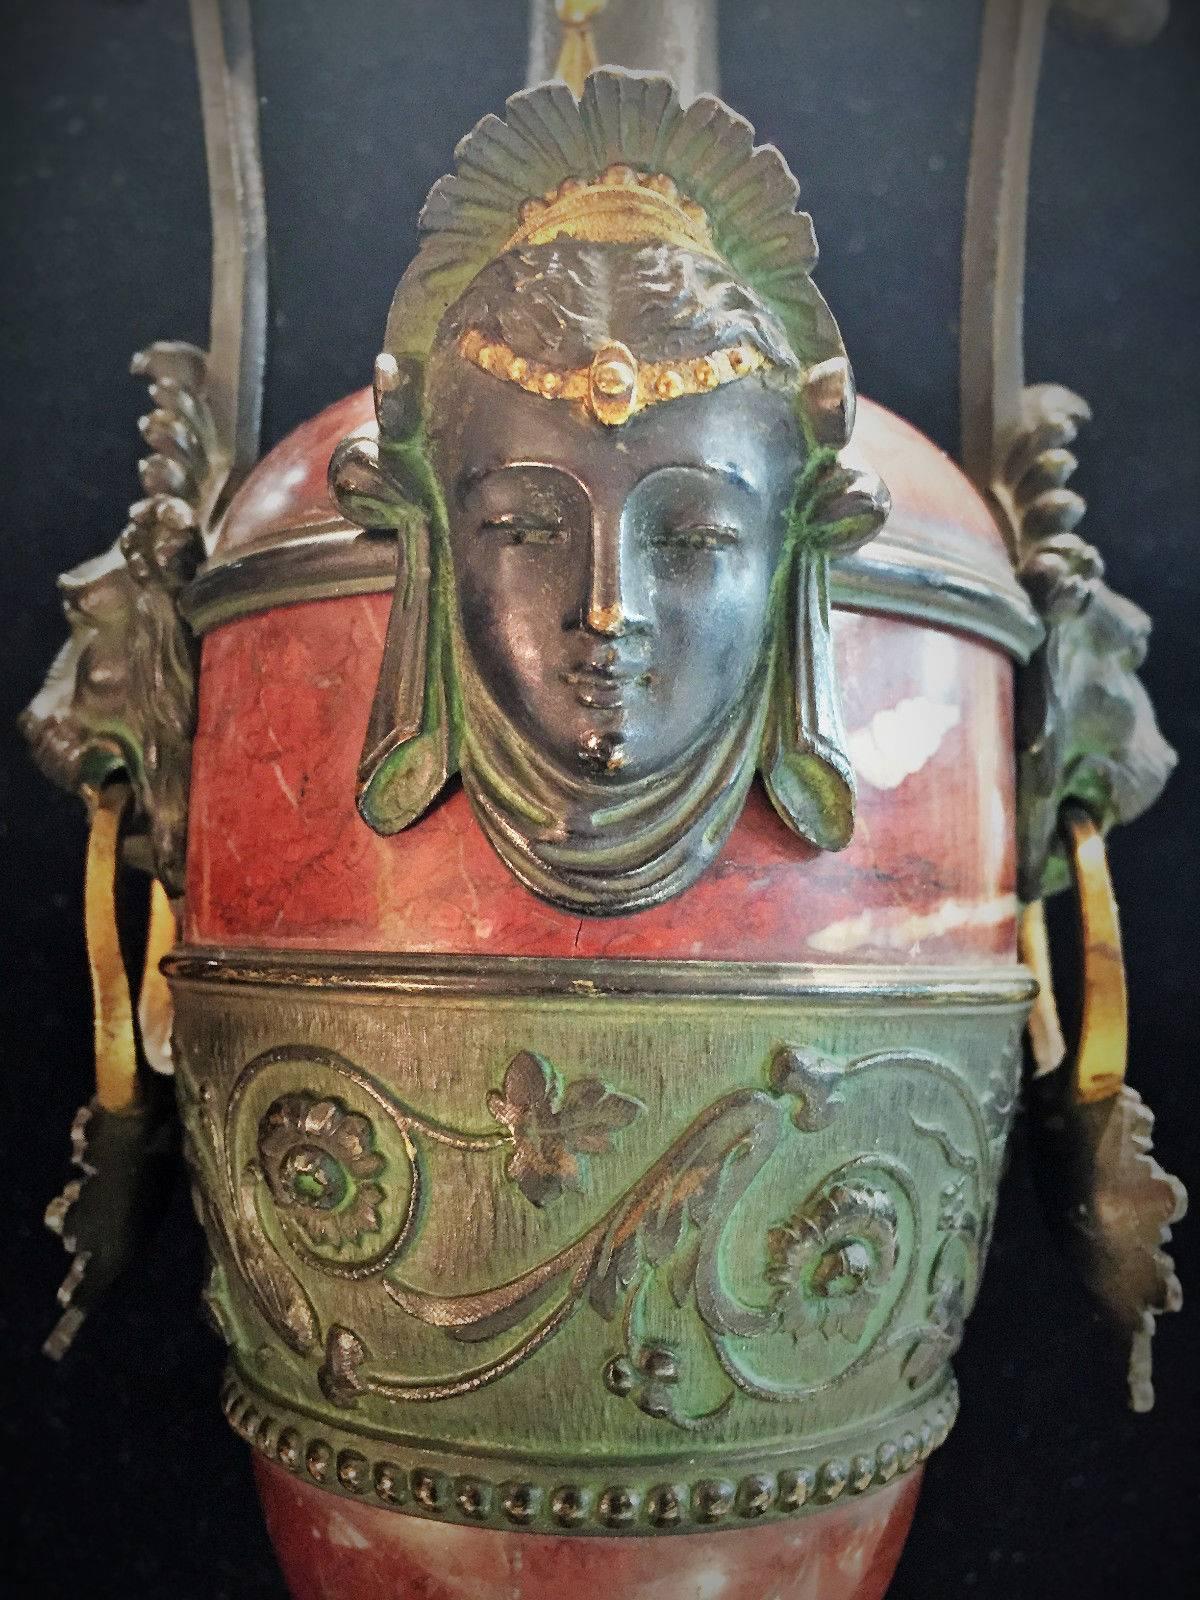 A garniture is a decoration for the top of a fireplace mantel. Presented here is a good example of richly patinated and gilded bronze and red marble in the style of Napoleon III, whose reign period was during the time of the Second French Empire,